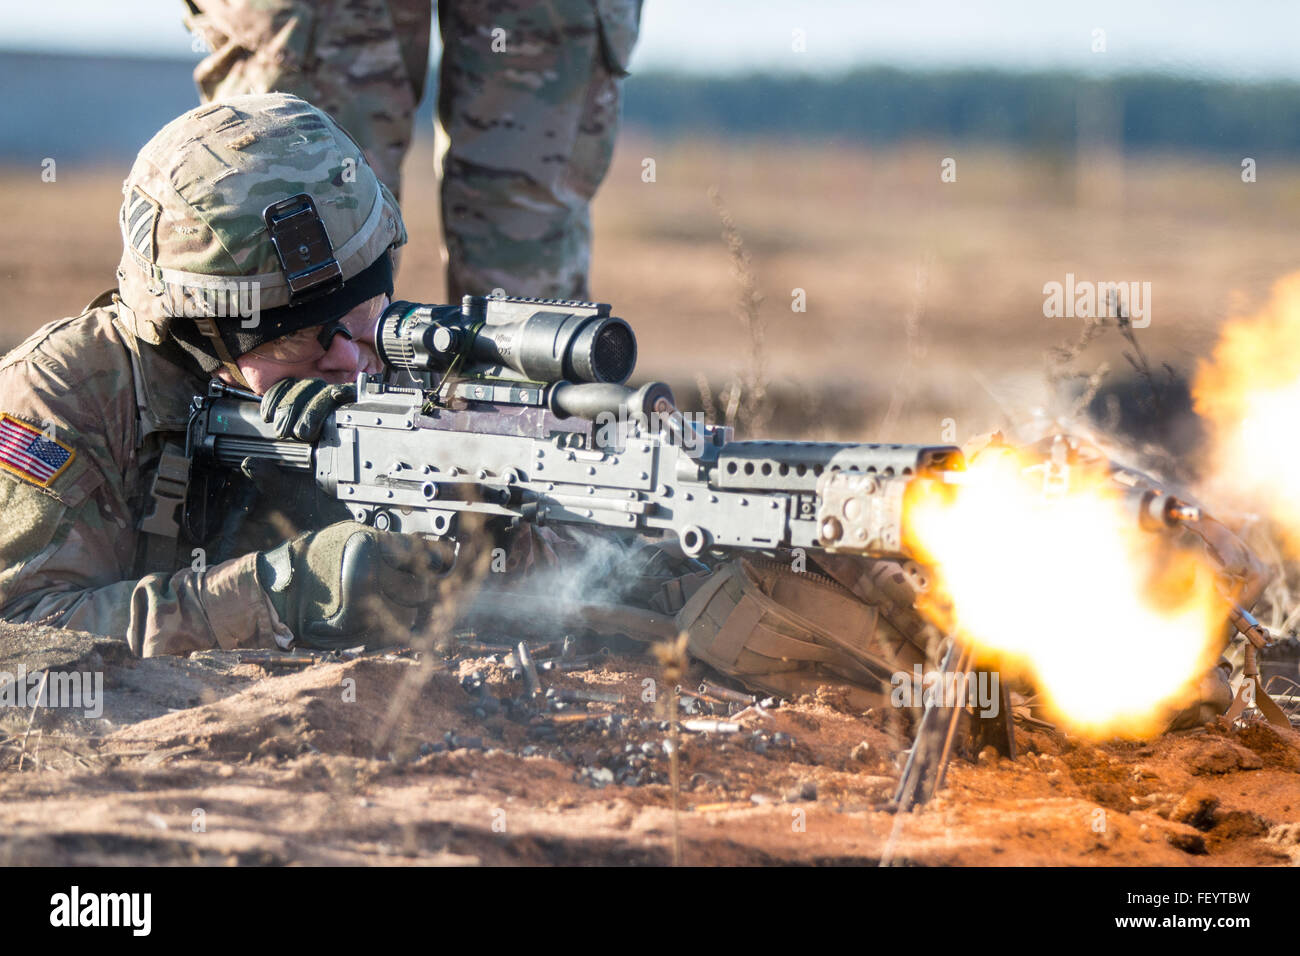 Spc. Timmy Racke, an infantryman with the 3rd Battalion, 69th Armor Regiment, 1st Armor Brigade Combat Team, 3rd Infantry Division, engages targets with his M240B Machine Gun while conducting battle drills Dec. 2, 2015 at Pabrade Training Area, Lithuania. The battle drills allowed Soldiers the opportunity to fine-tune their skills within their squad and platoon. Stock Photo